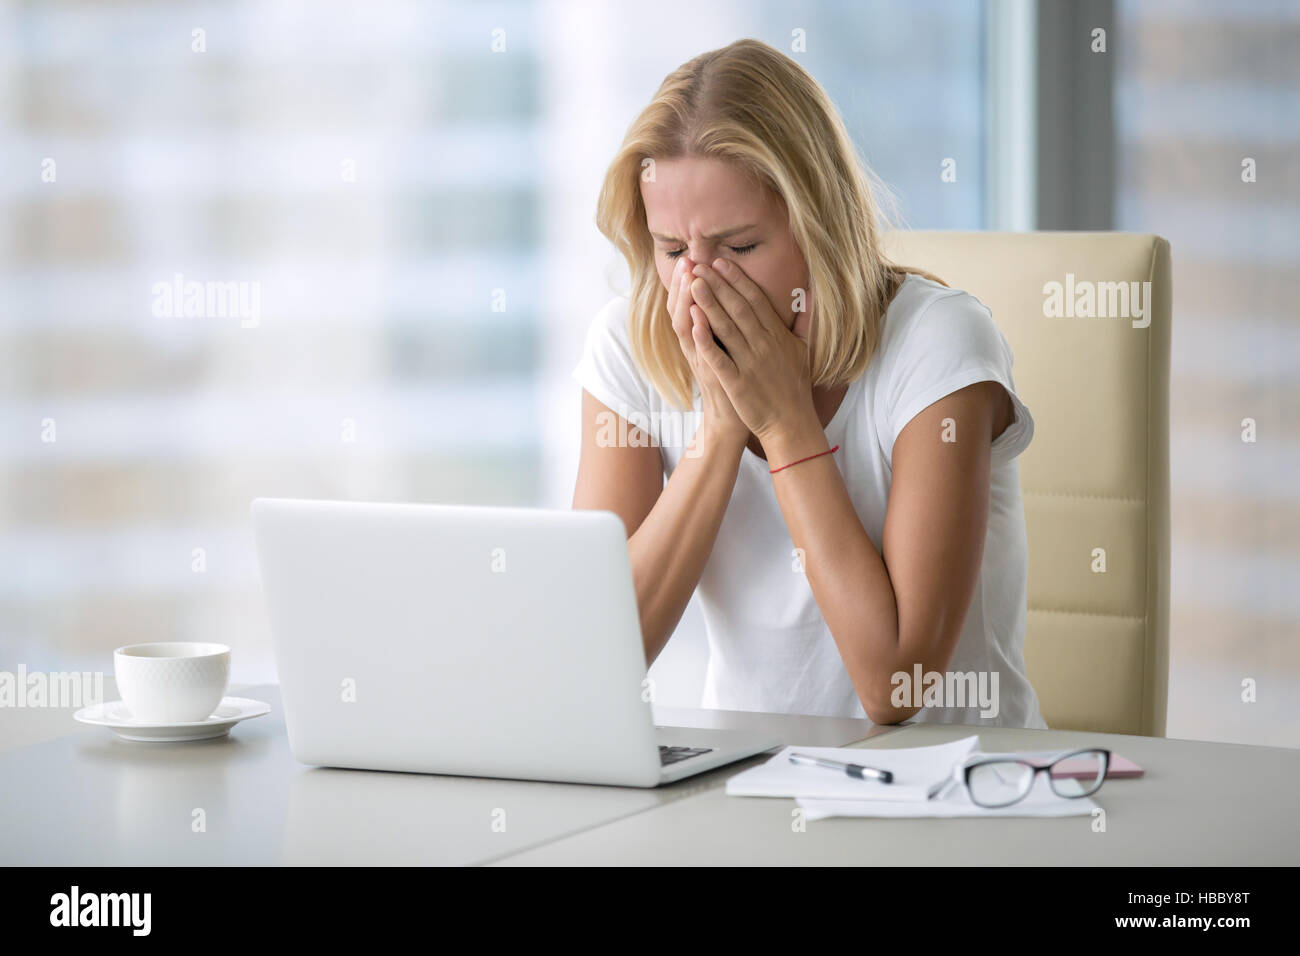 Young woman covering her face Stock Photo